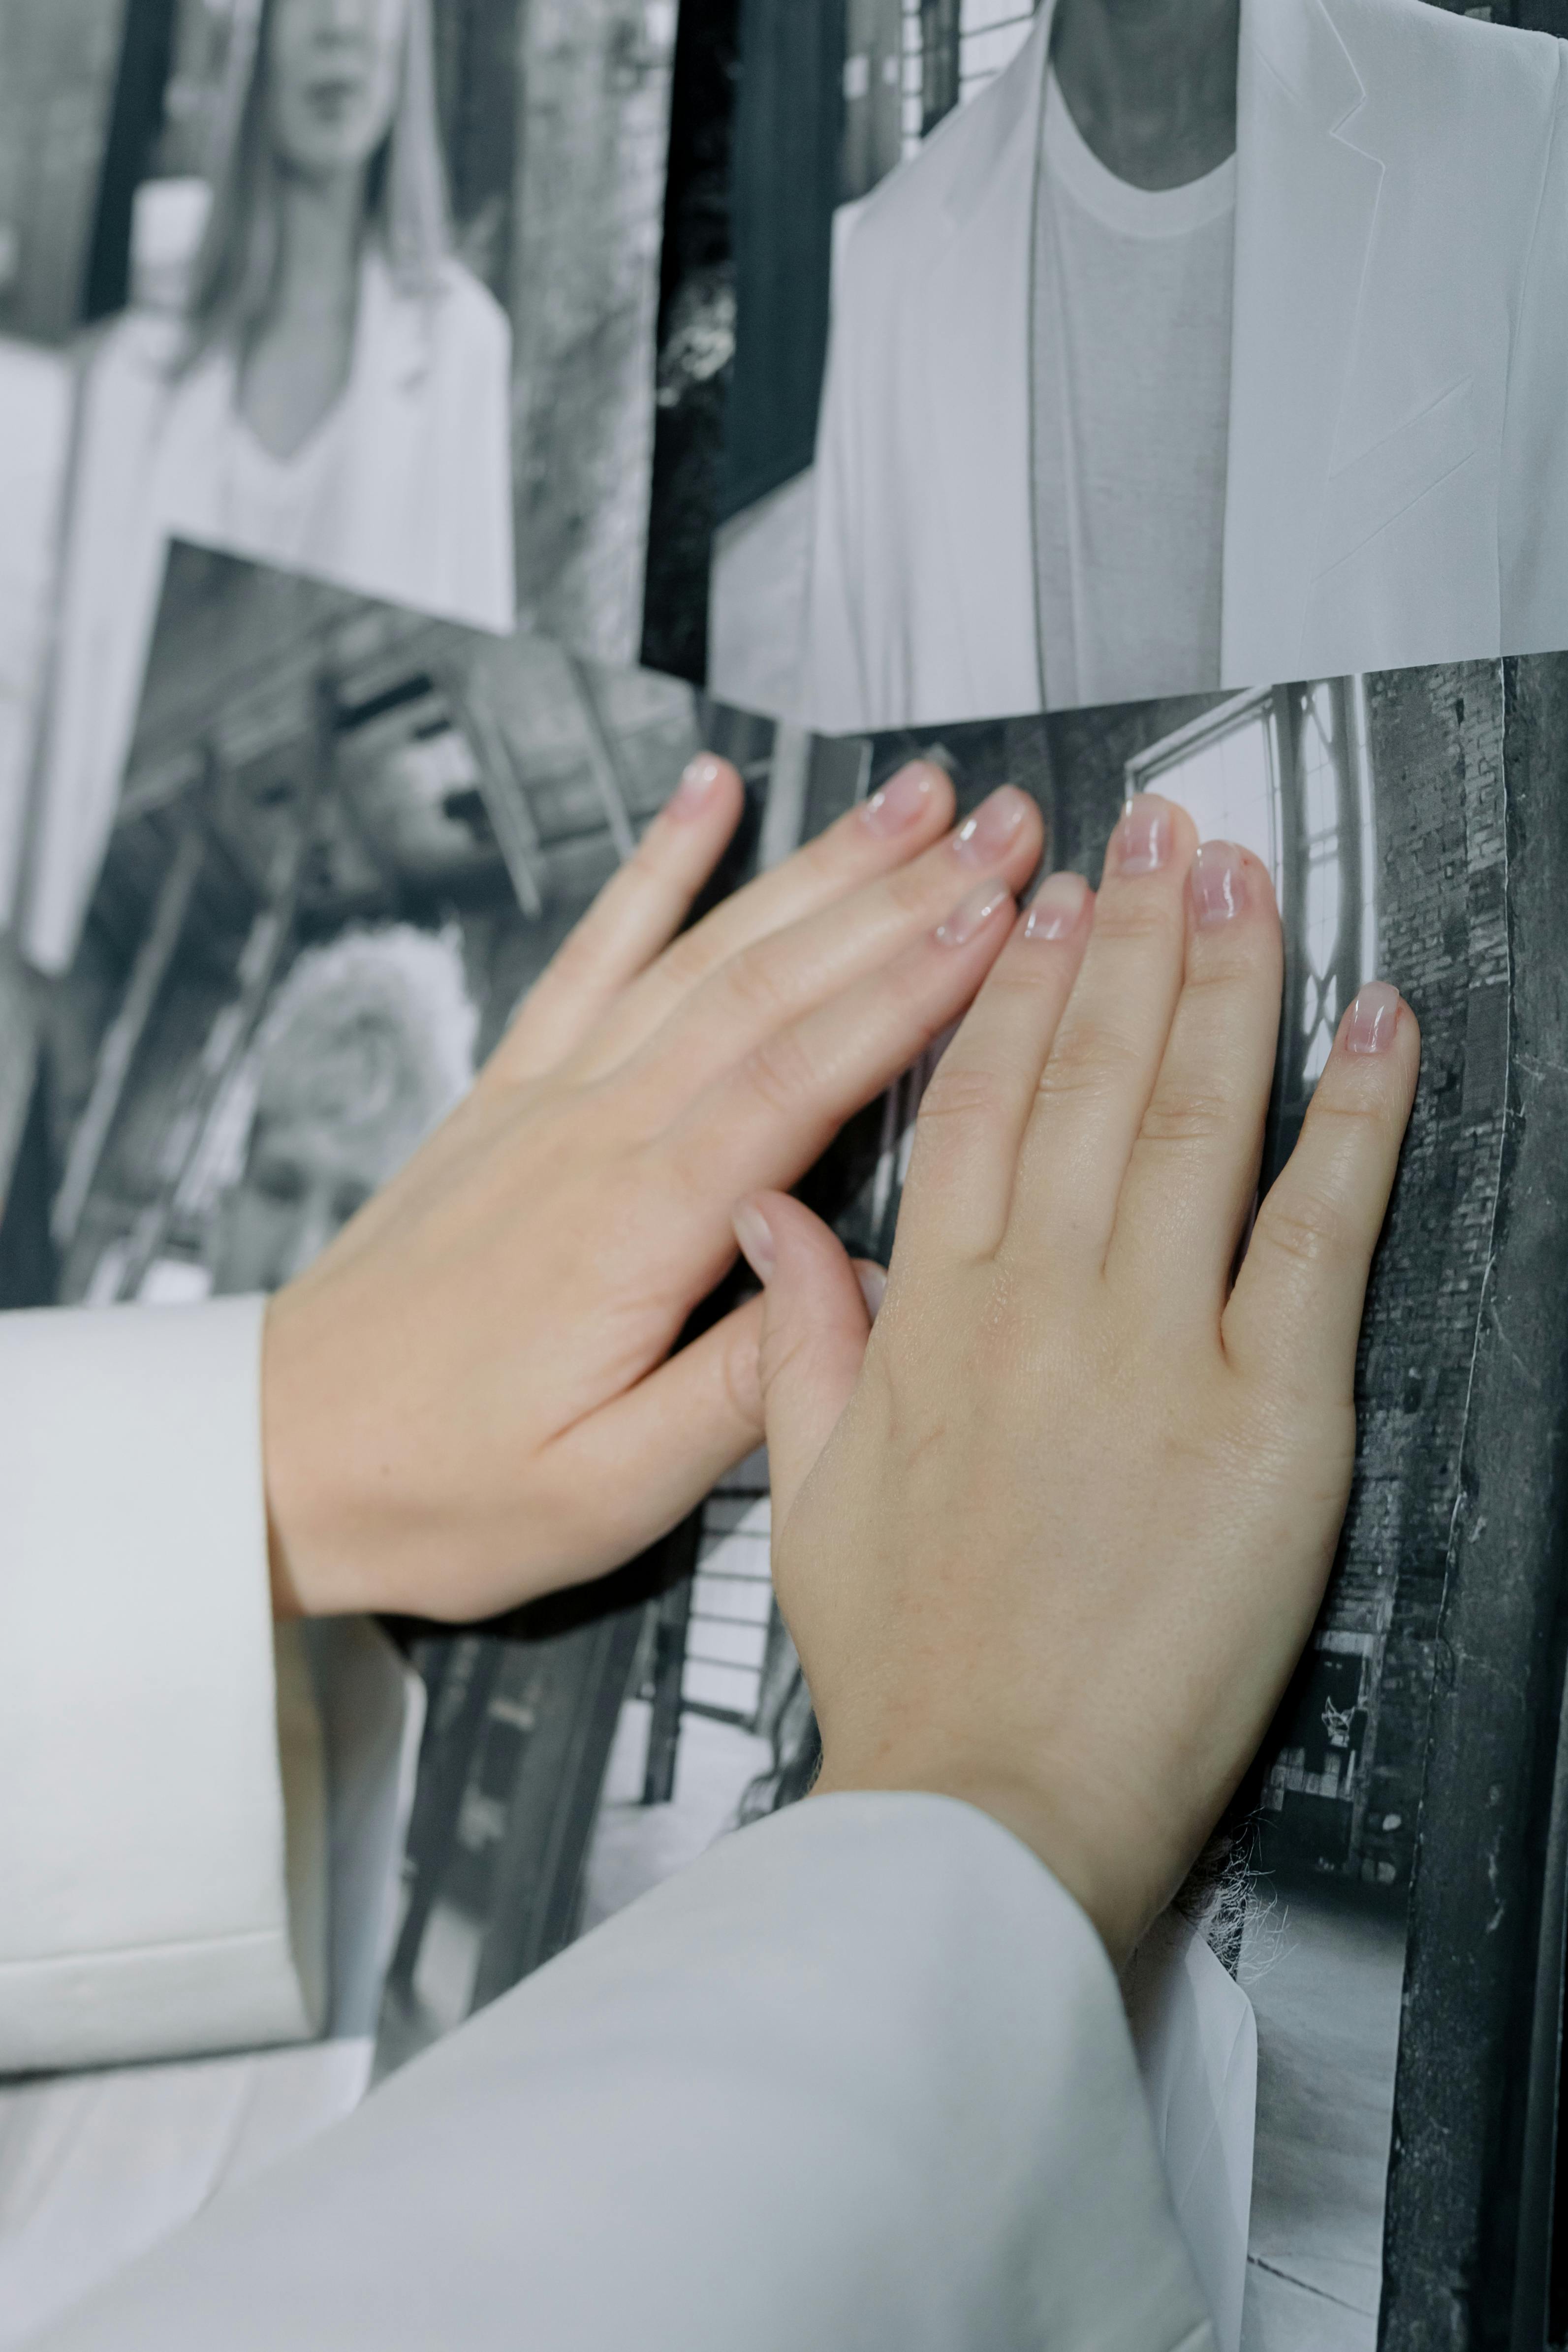 Hands attaching photographs to a wall | Source: Pexels